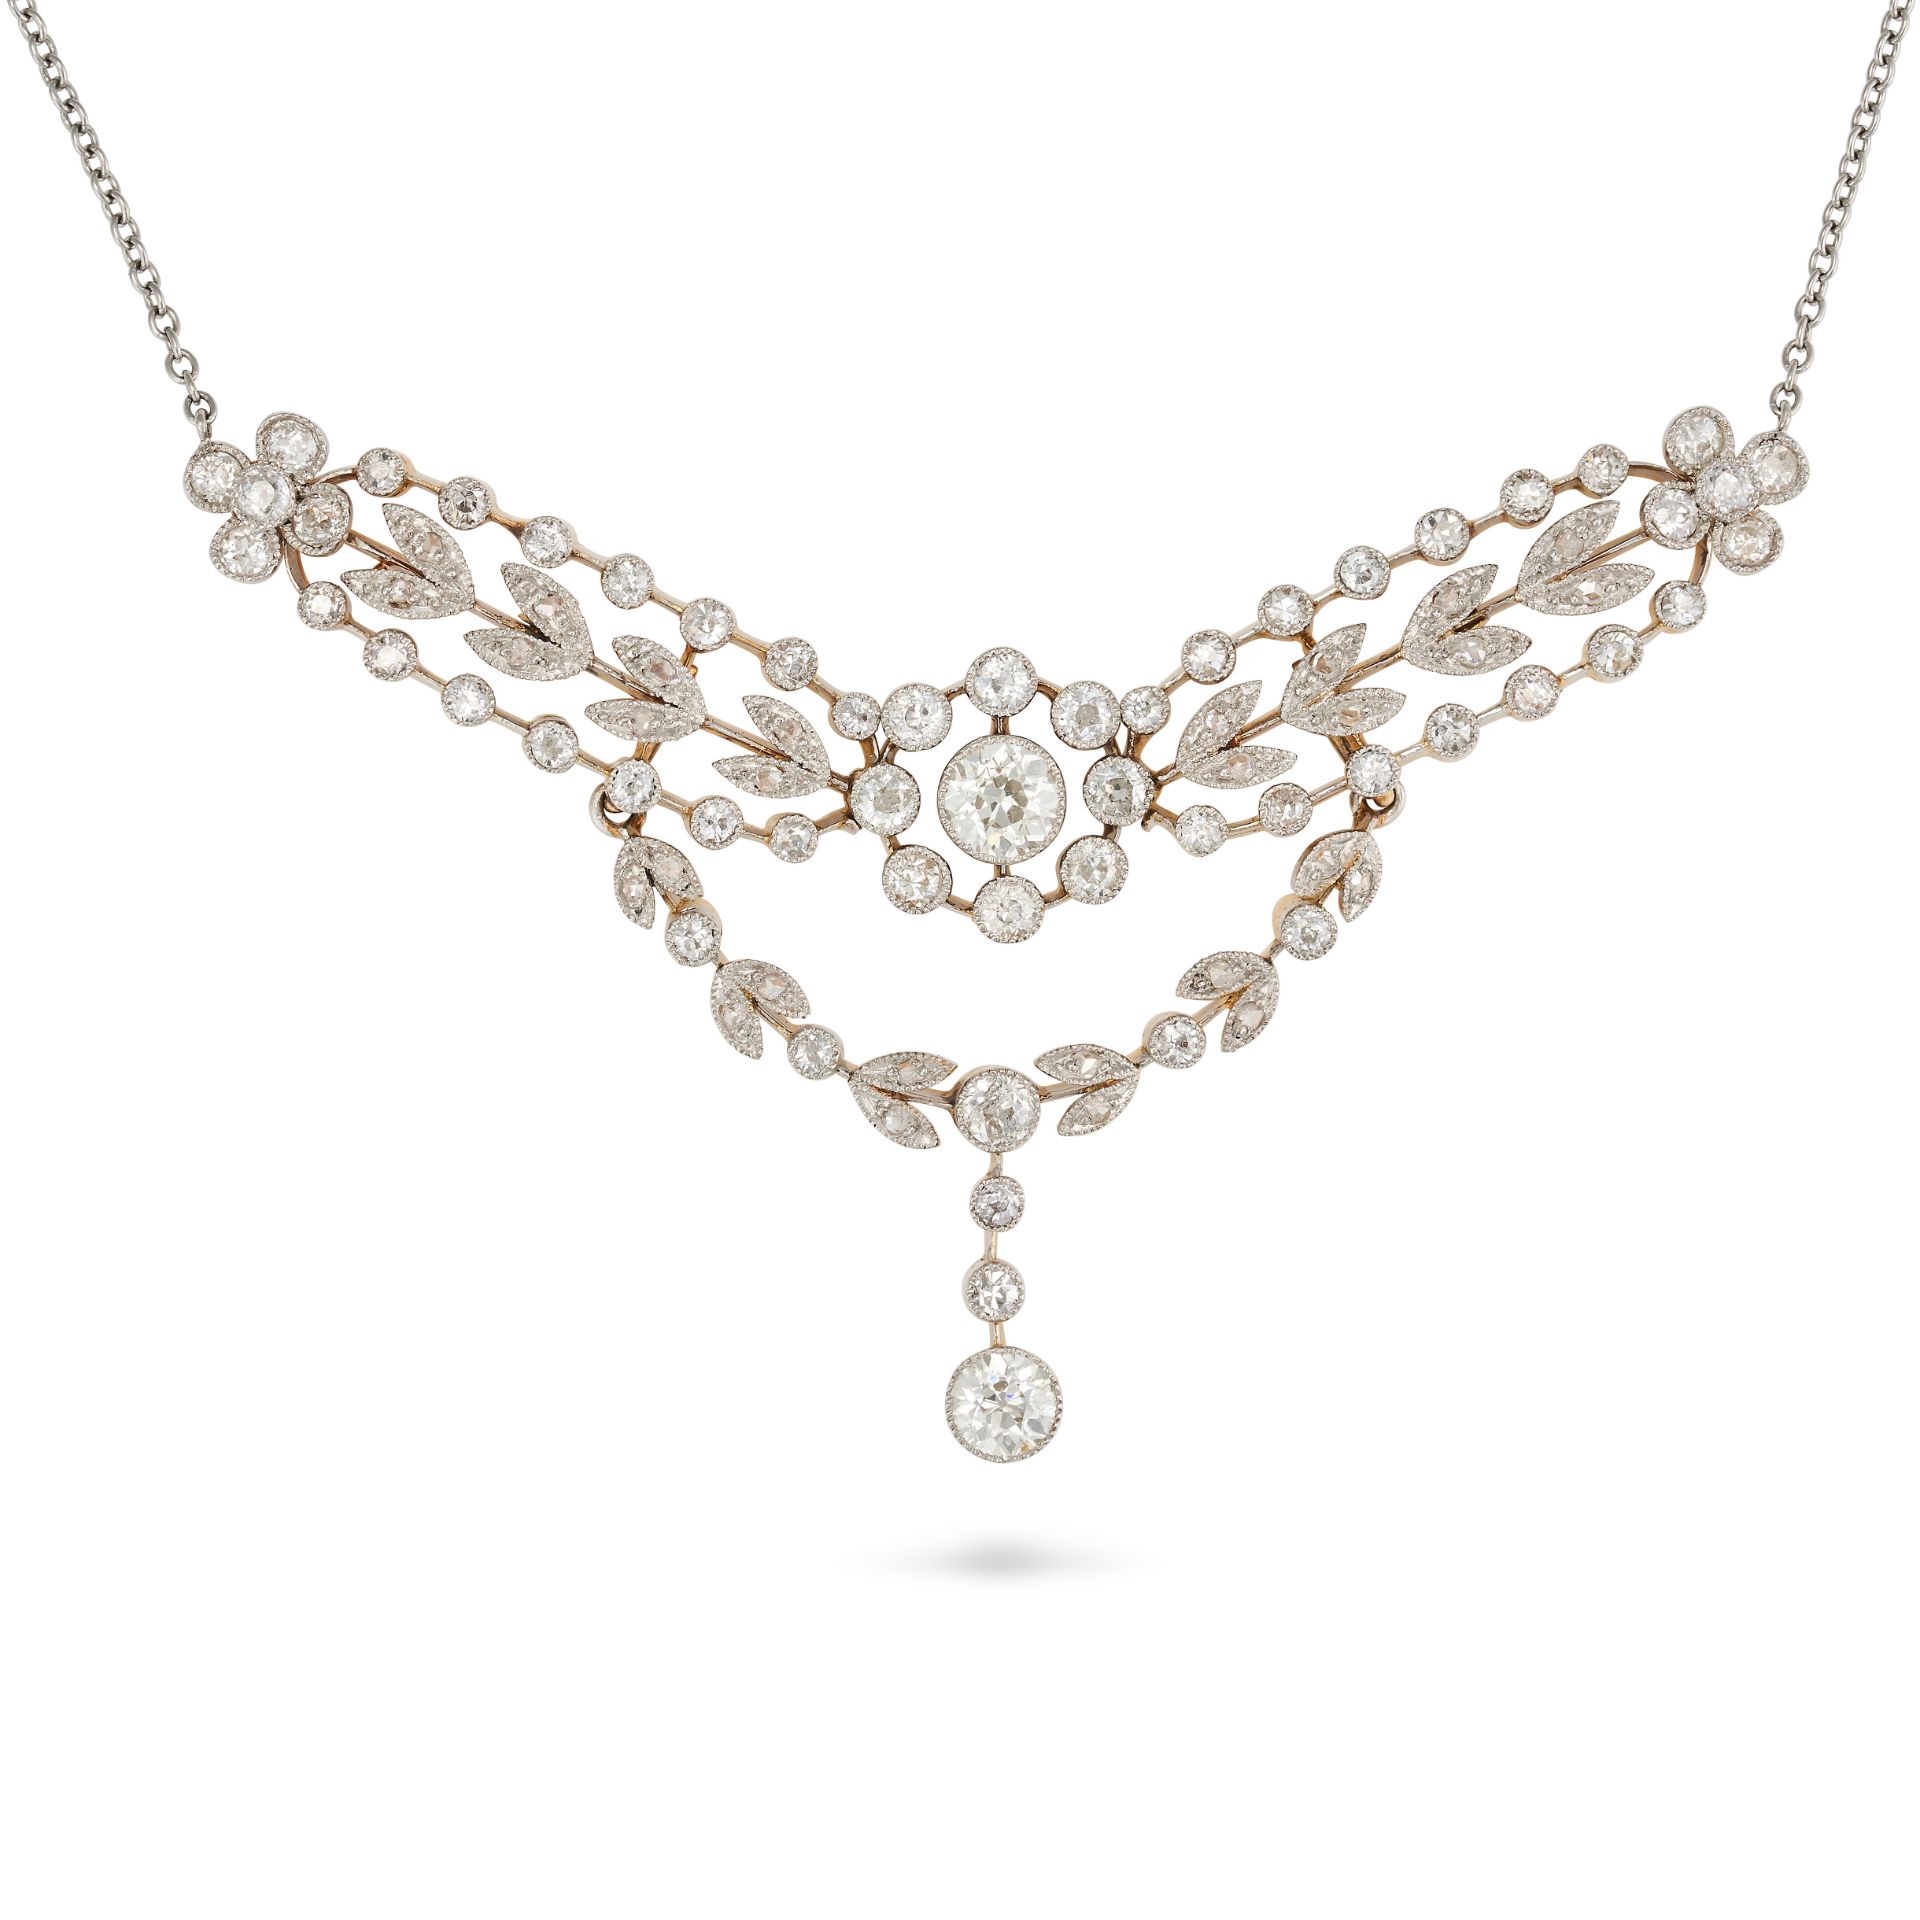 A DIAMOND NECKLACE in platinum and yellow gold, the Belle Epoque pendant set with old and rose cu...